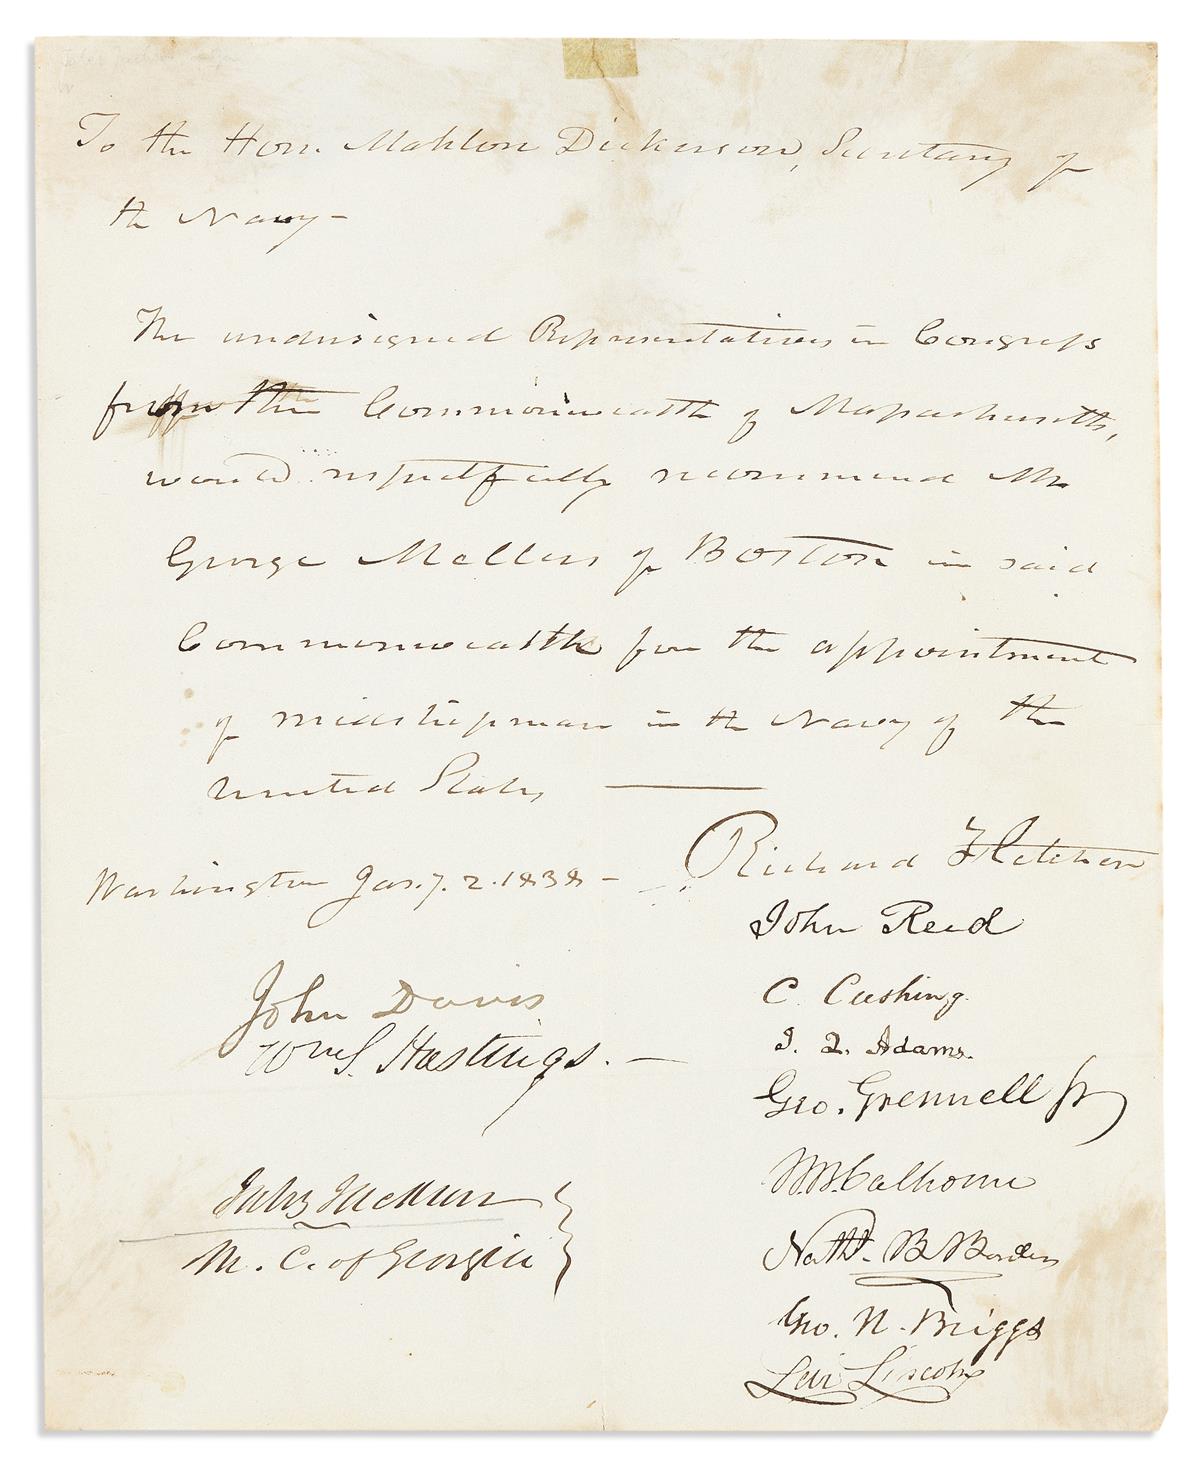 ADAMS, JOHN QUINCY. Signature, J.Q. Adams, as Representative, on a petition recommending George McClure[?] for a midshipman appointme